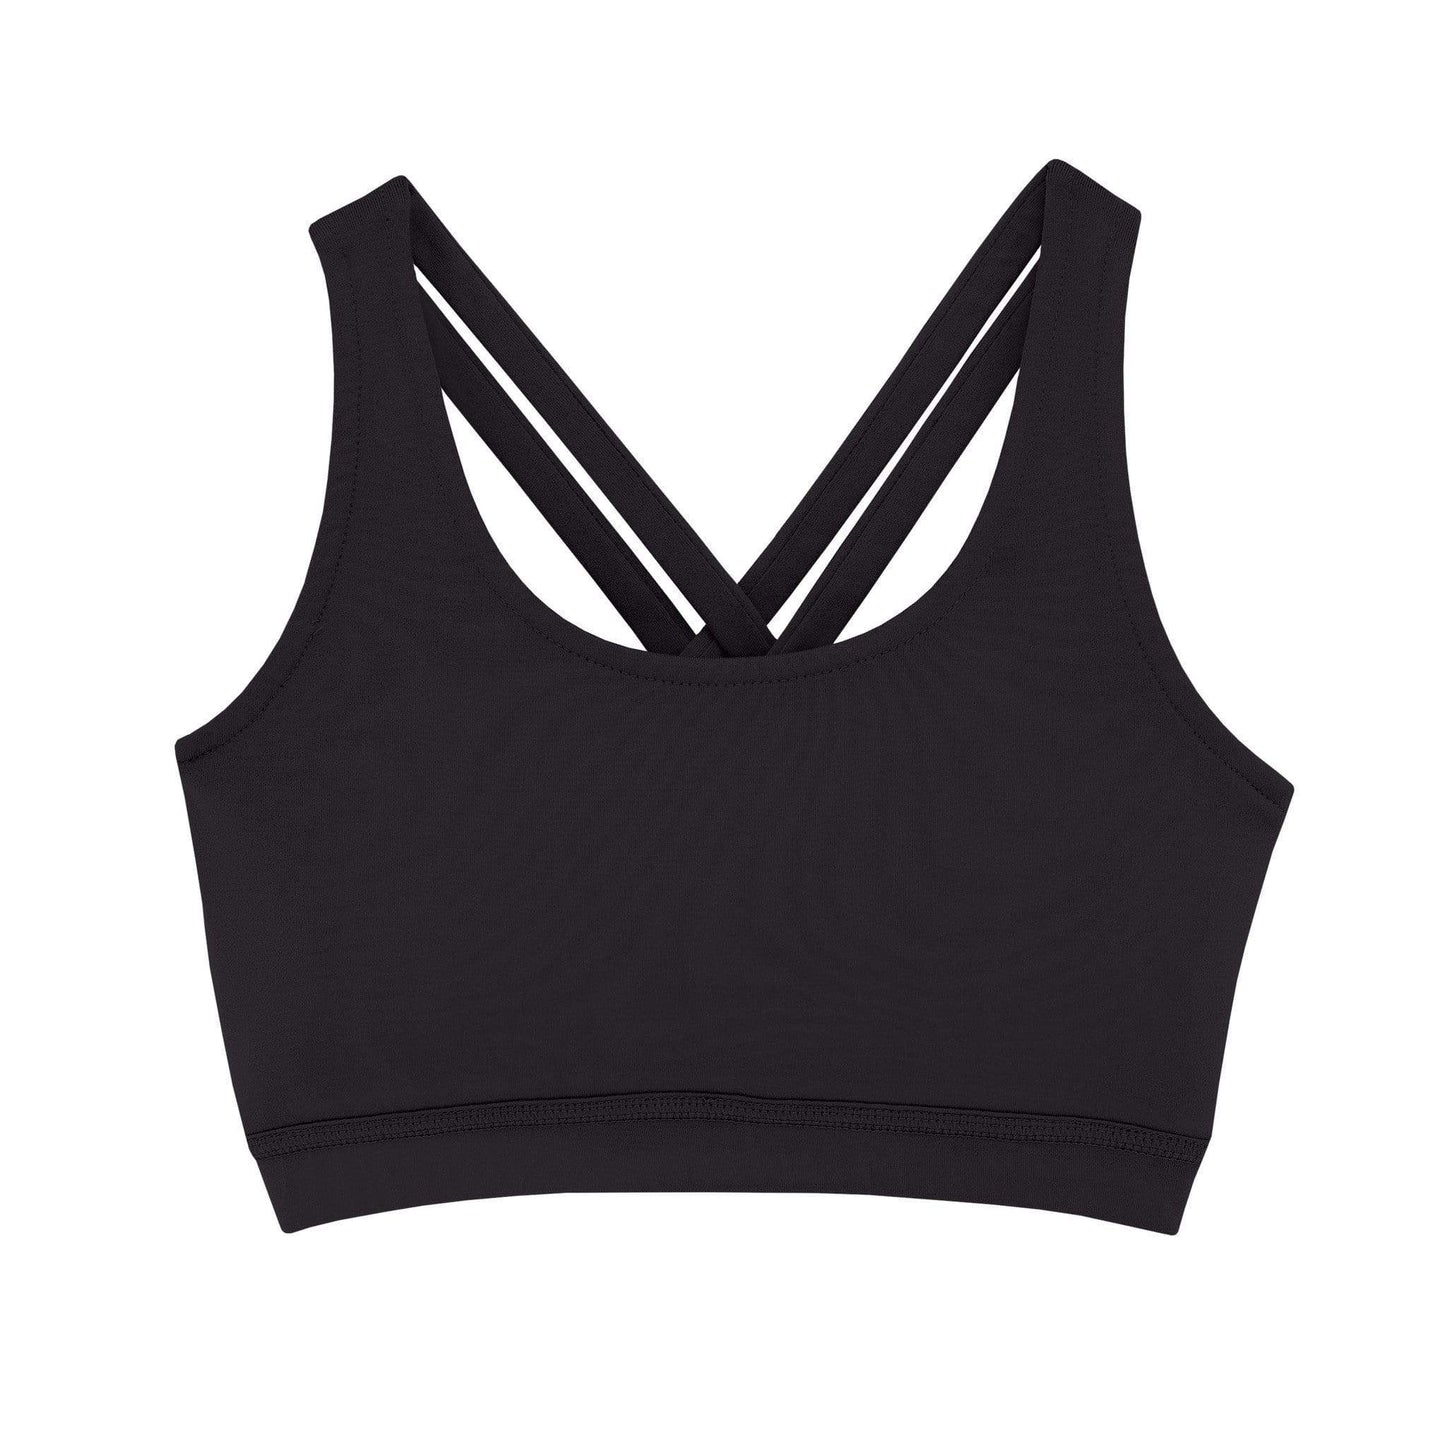 Cheer Sports Bras, Undergear, and More